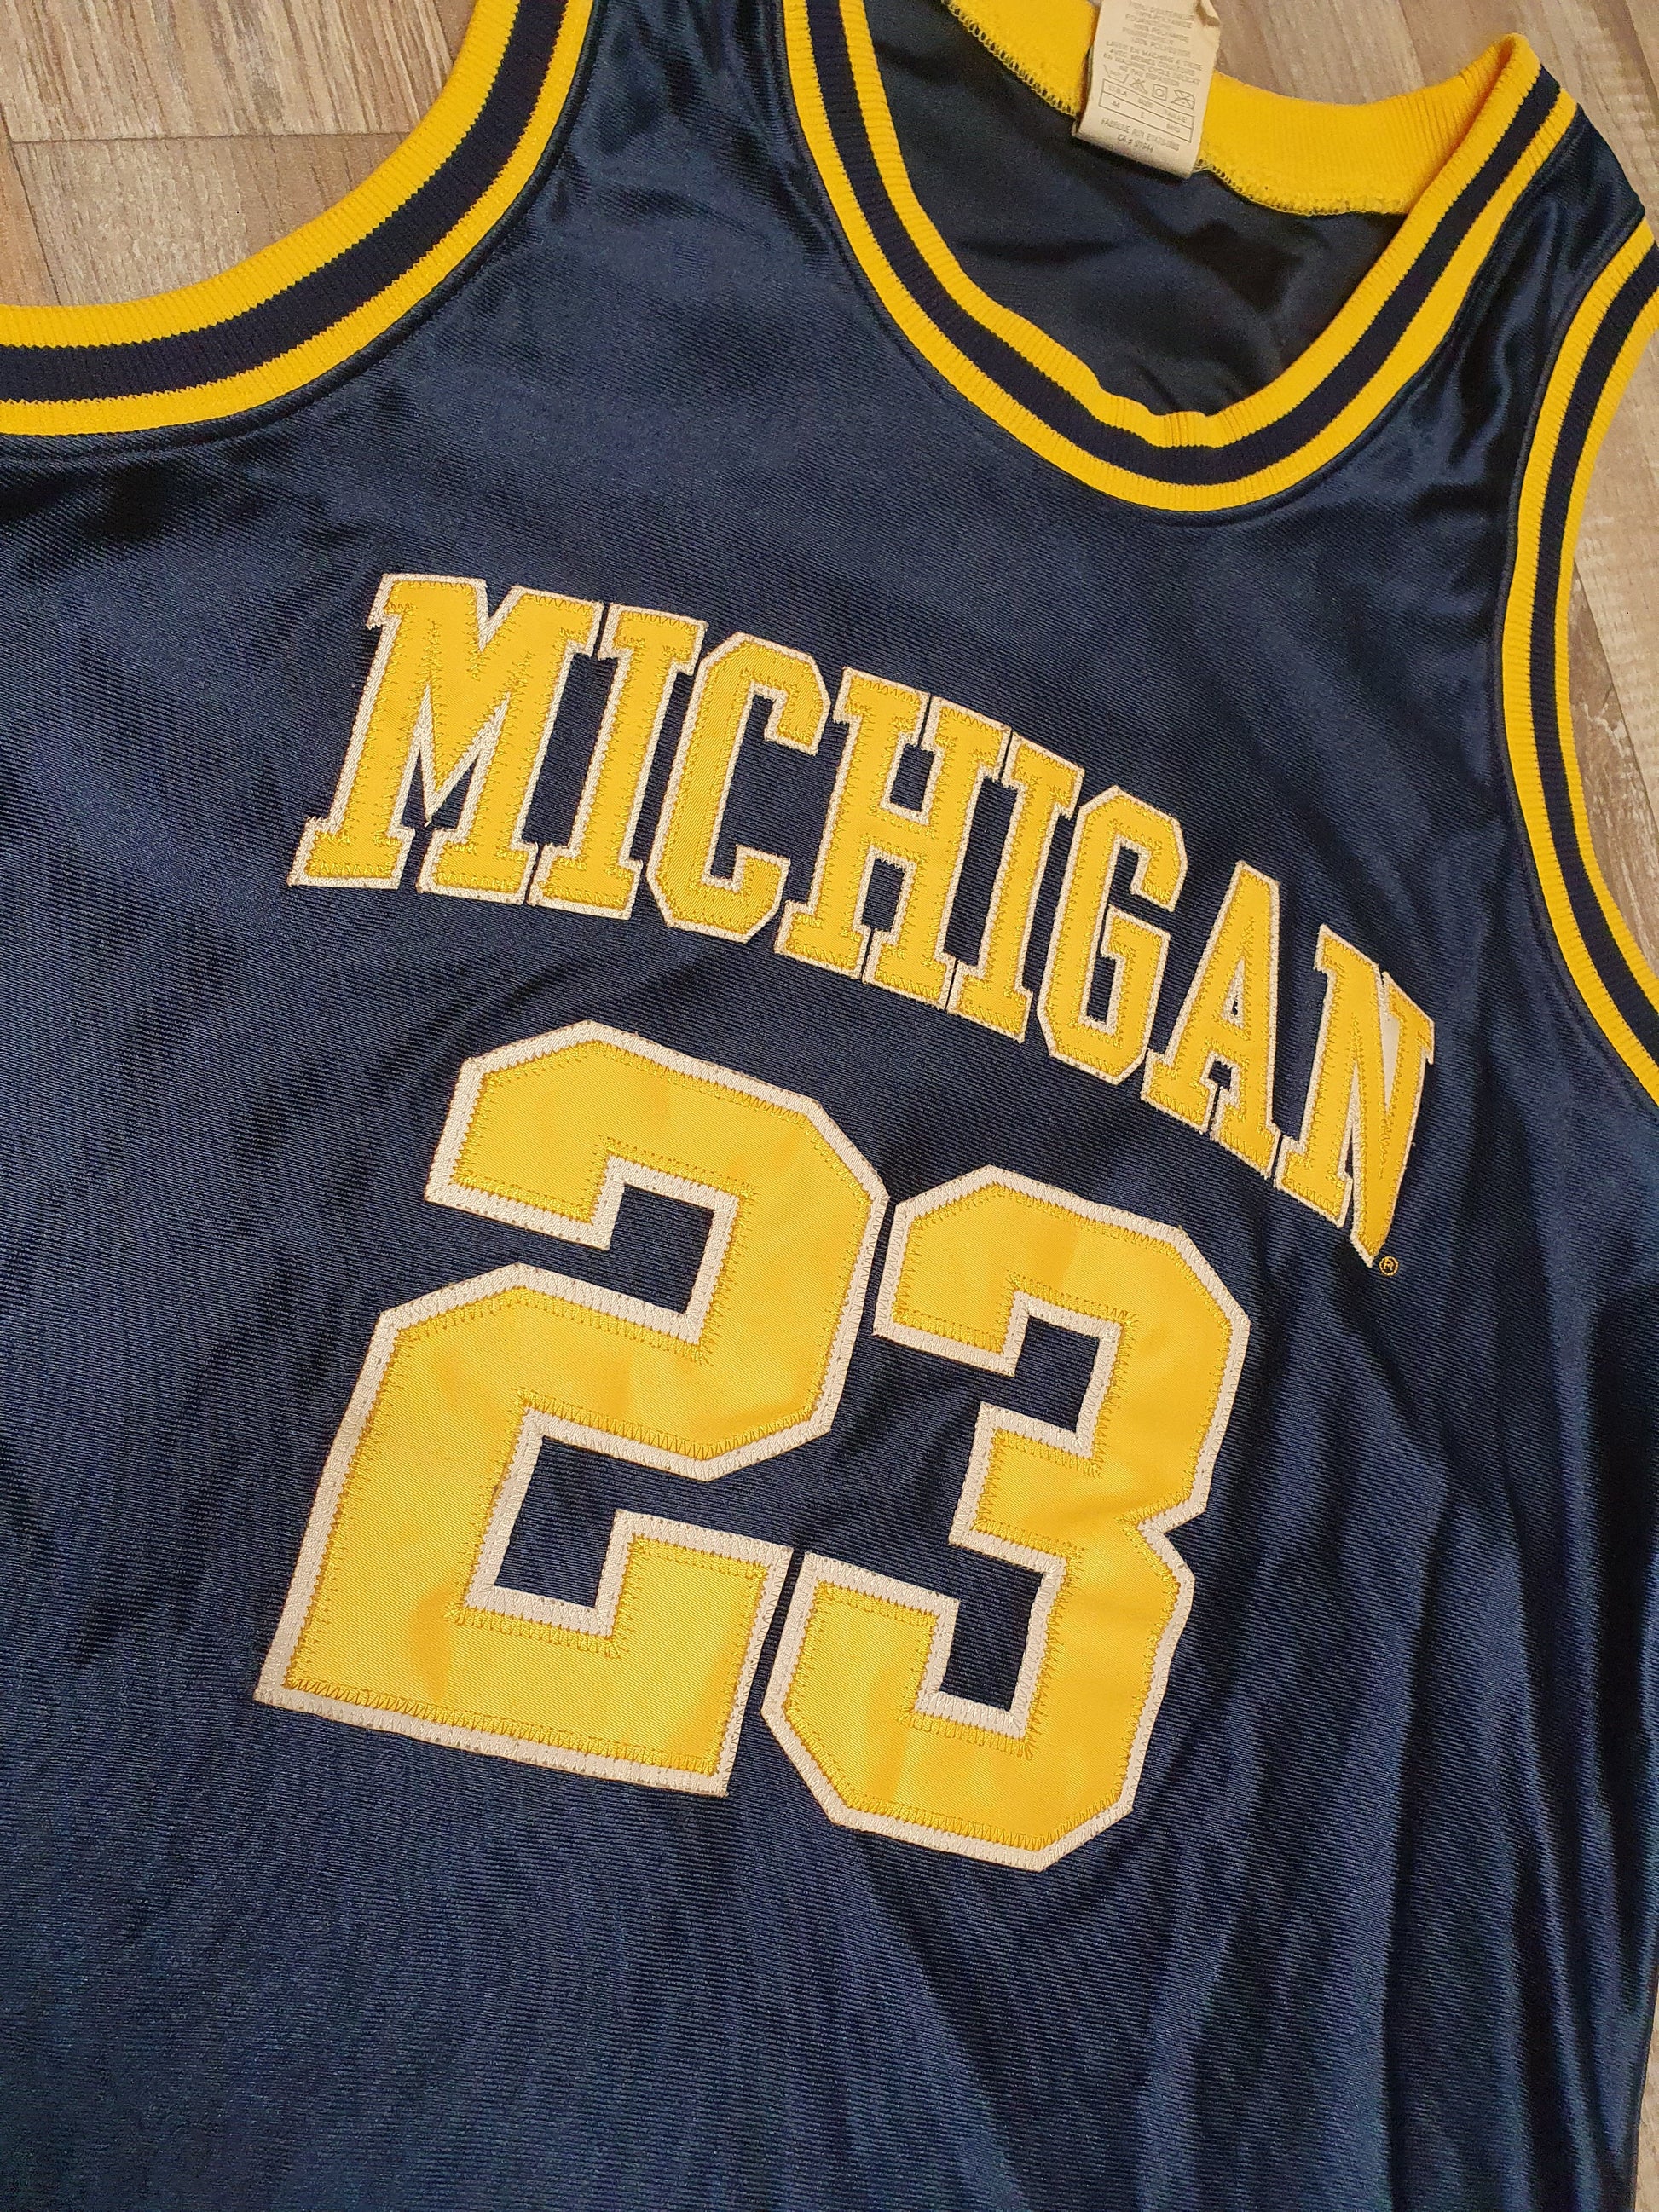 Maurice Taylor Michigan Wolverines Jersey Size Large